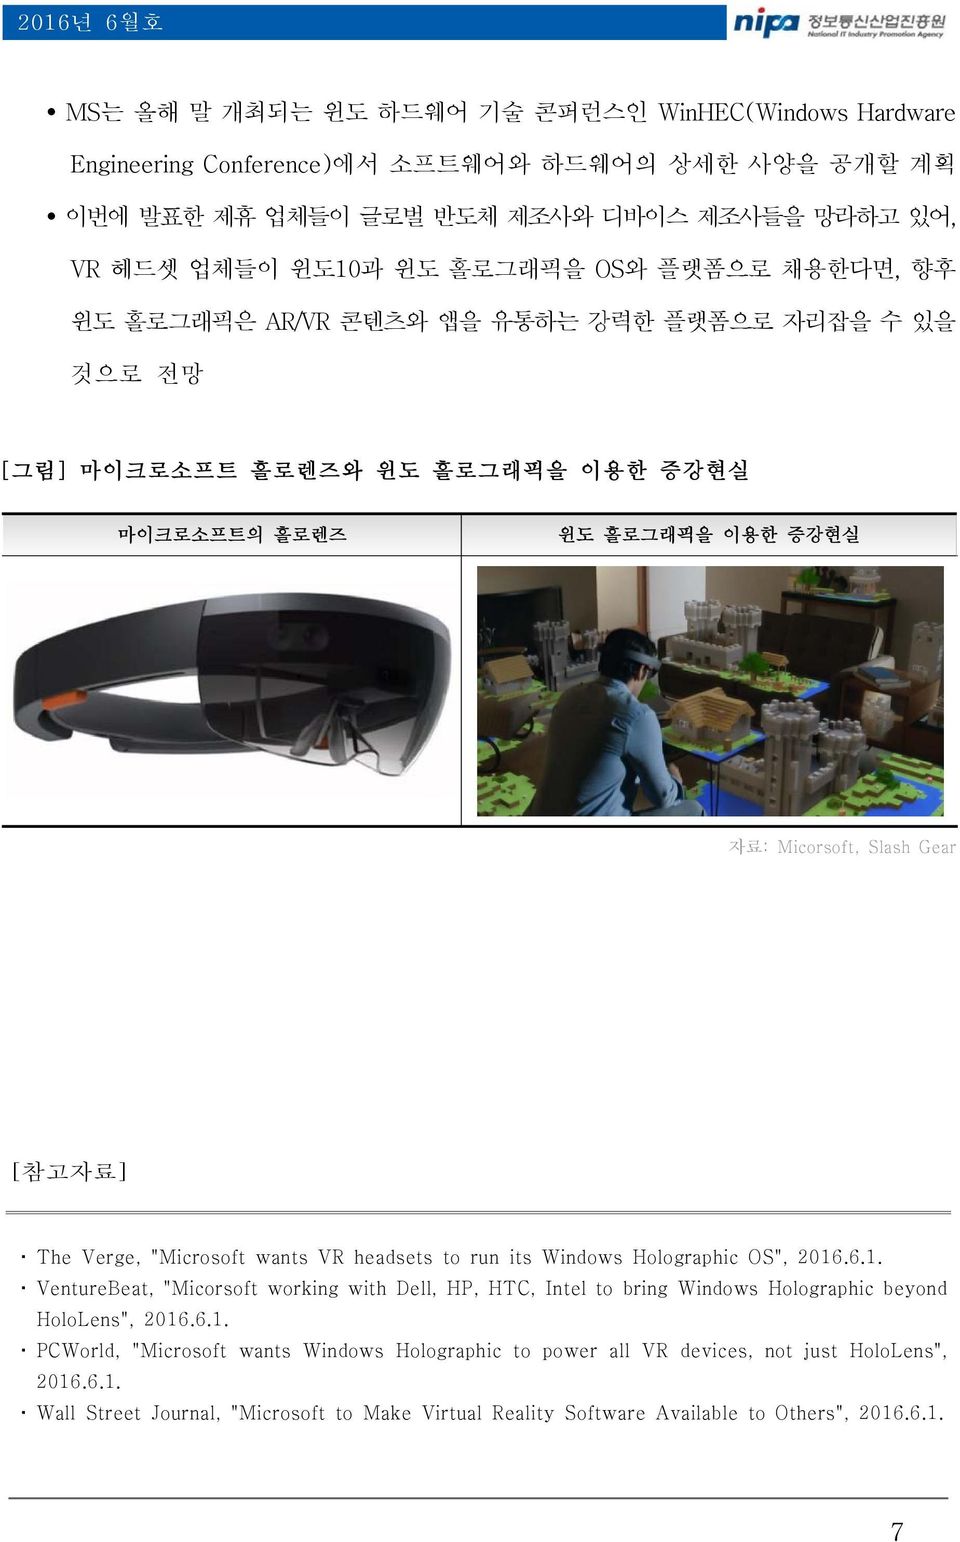 Verge, "Microsoft wants VR headsets to run its Windows Holographic OS", 2016.6.1. VentureBeat, "Micorsoft working with Dell, HP, HTC, Intel to bring Windows Holographic beyond HoloLens", 2016.6.1. PCWorld, "Microsoft wants Windows Holographic to power all VR devices, not just HoloLens", 2016.